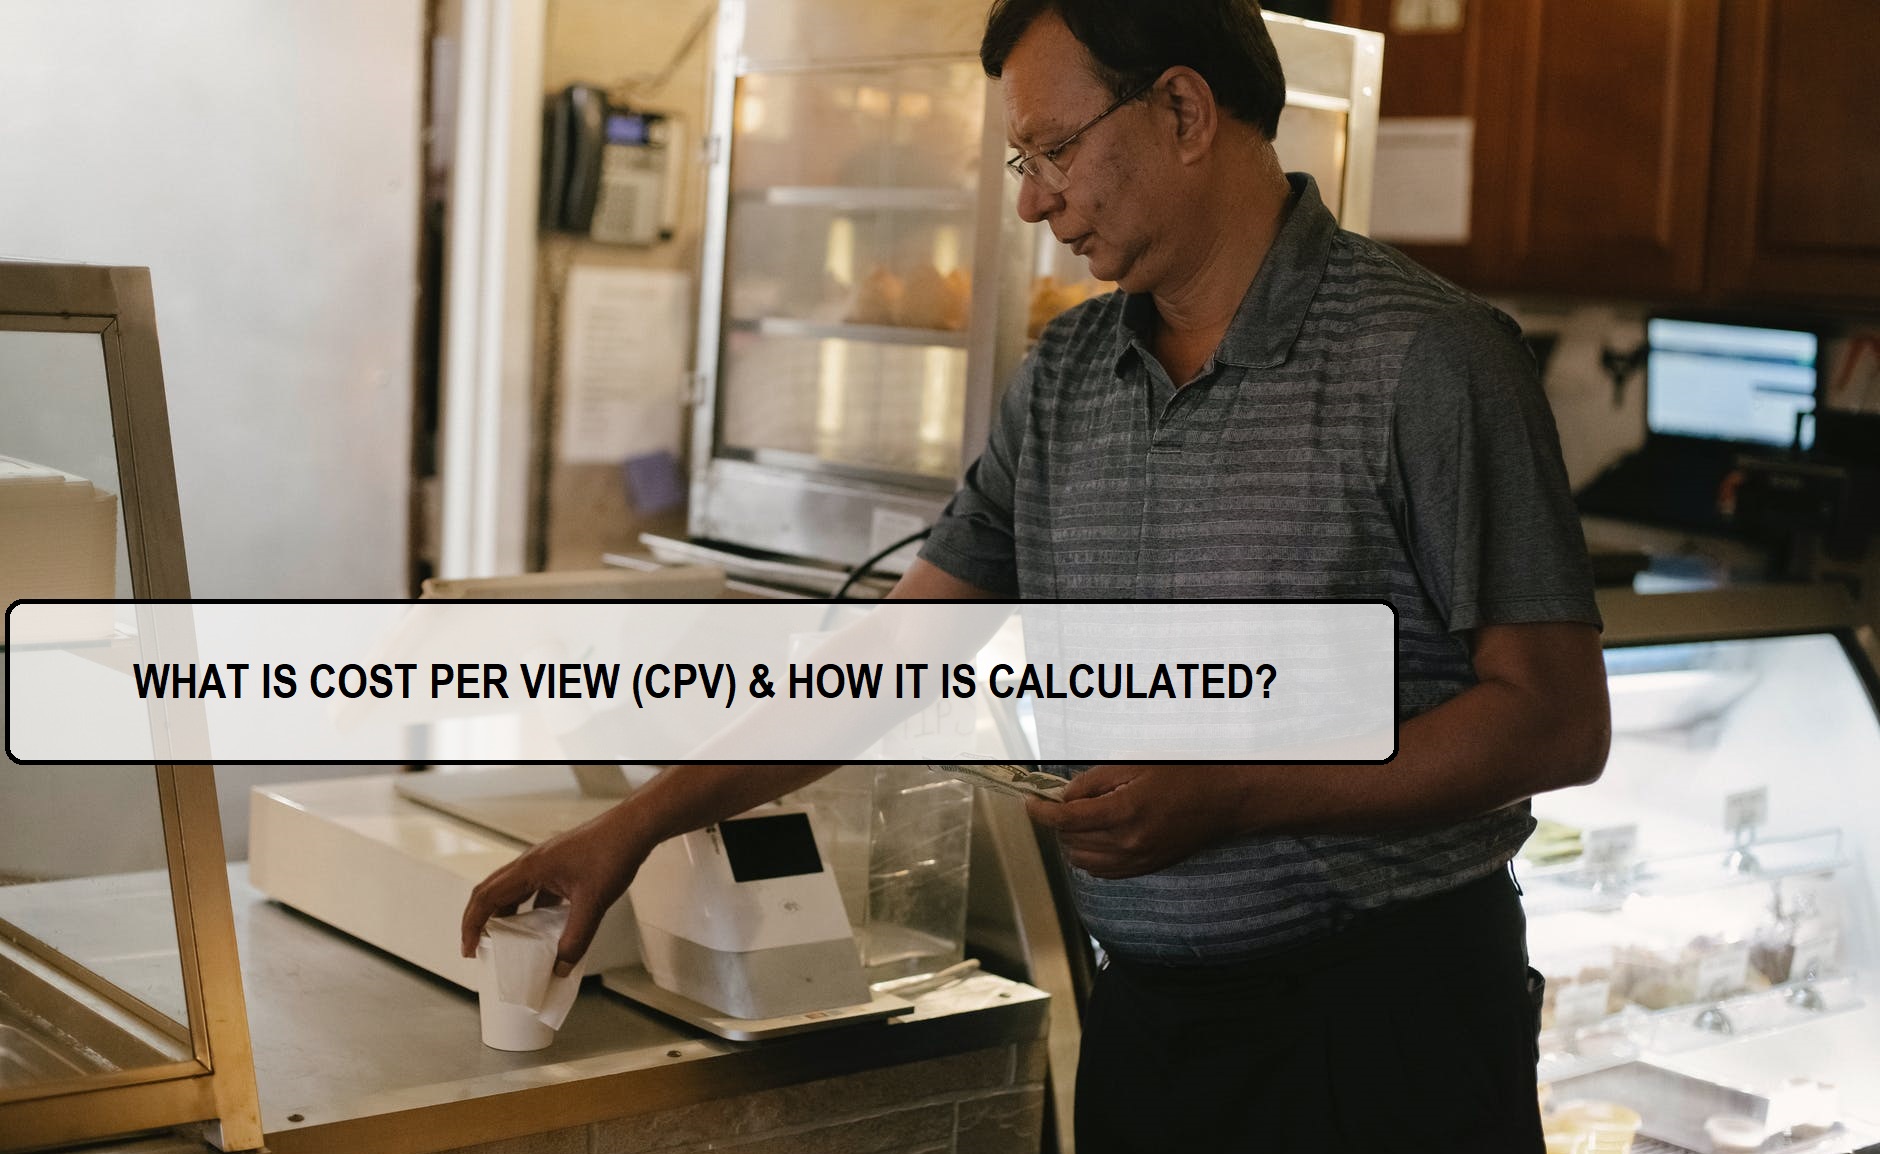 WHAT IS COST PER VIEW (CPV) & HOW IT IS CALCULATED?